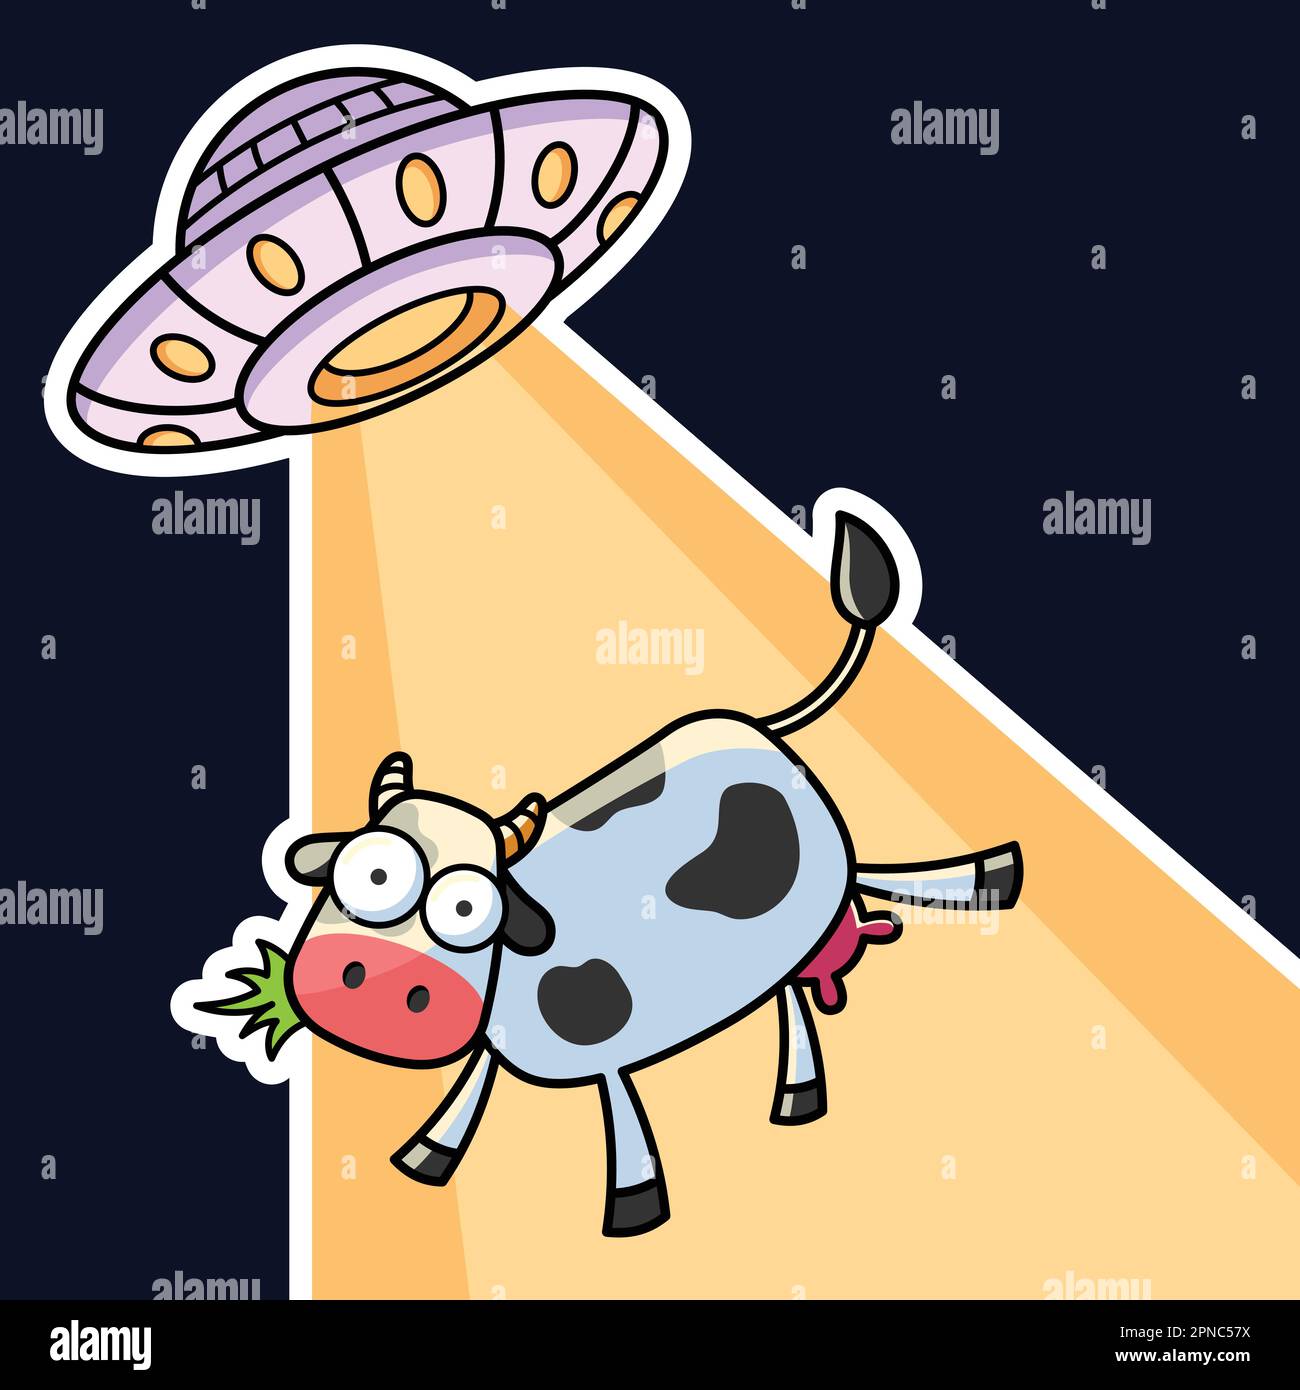 Cute Cow Abduted By UFO. Premium Vector Graphic Assets. Stock Vector